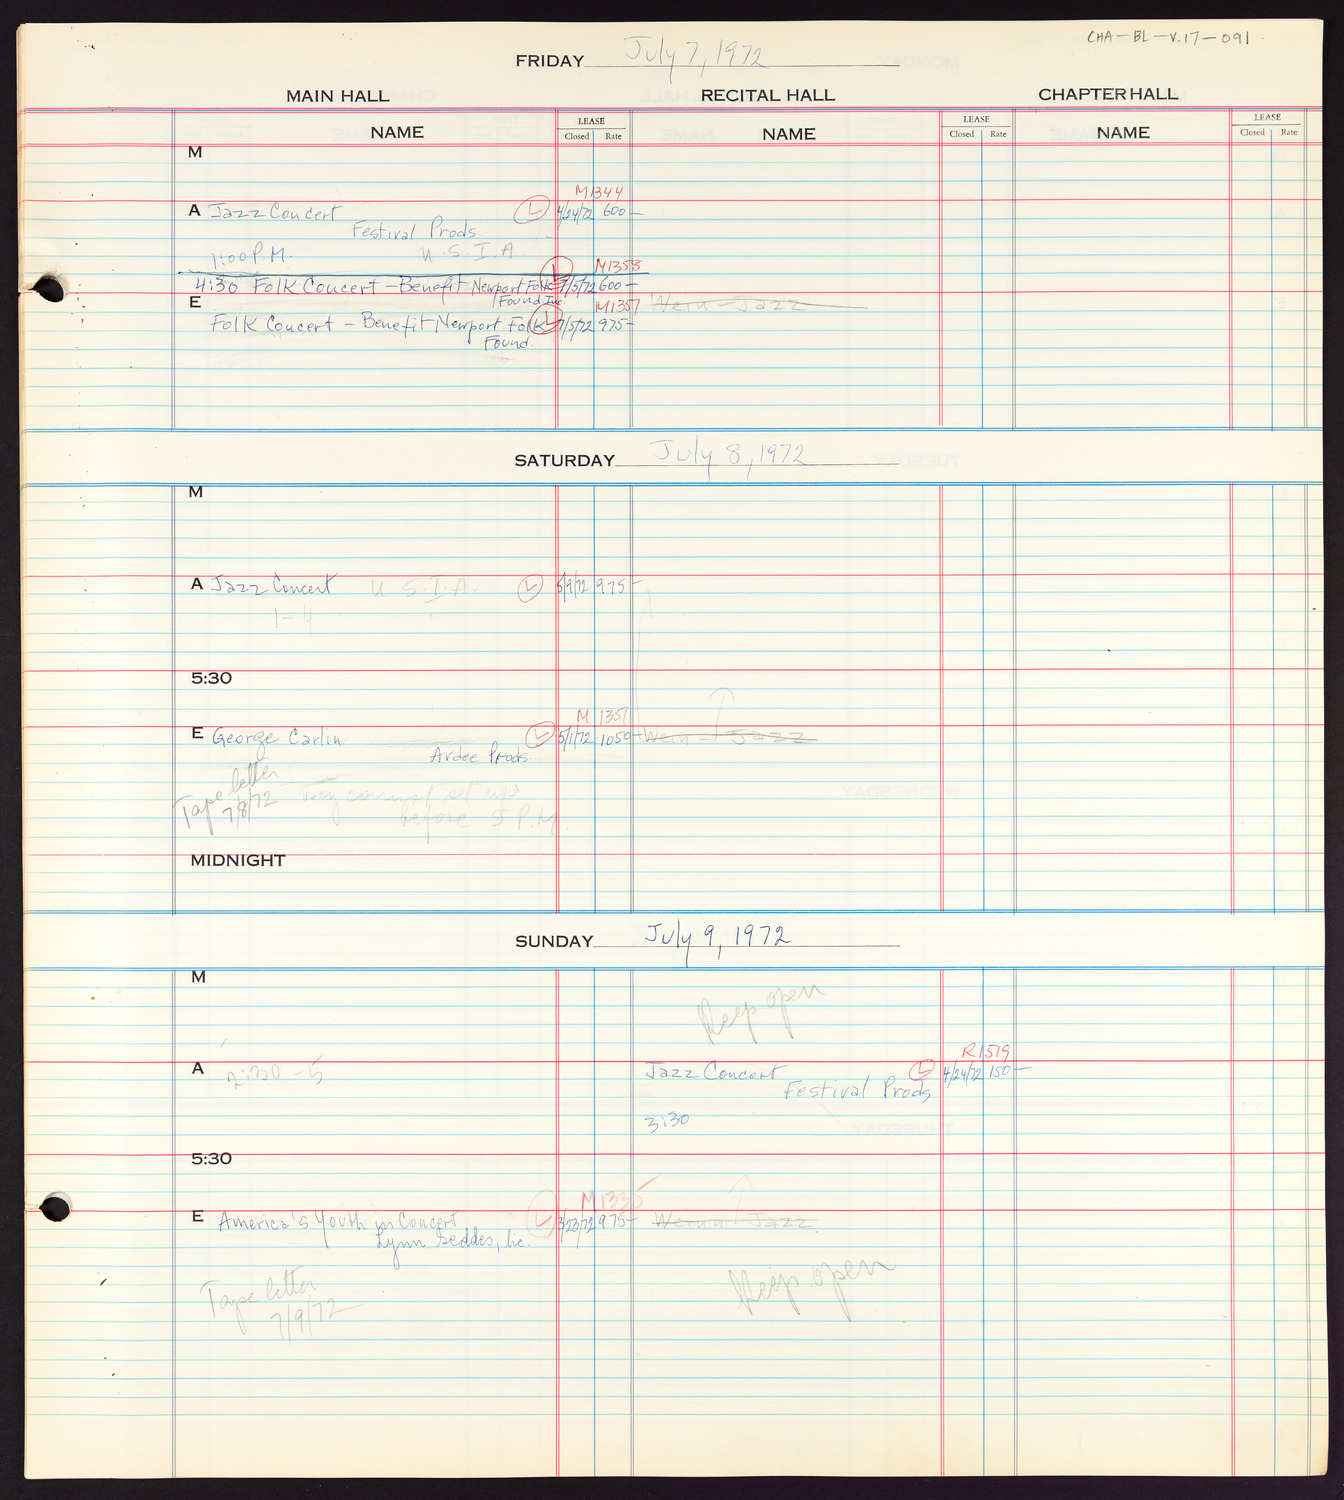 Carnegie Hall Booking Ledger, volume 17, page 91